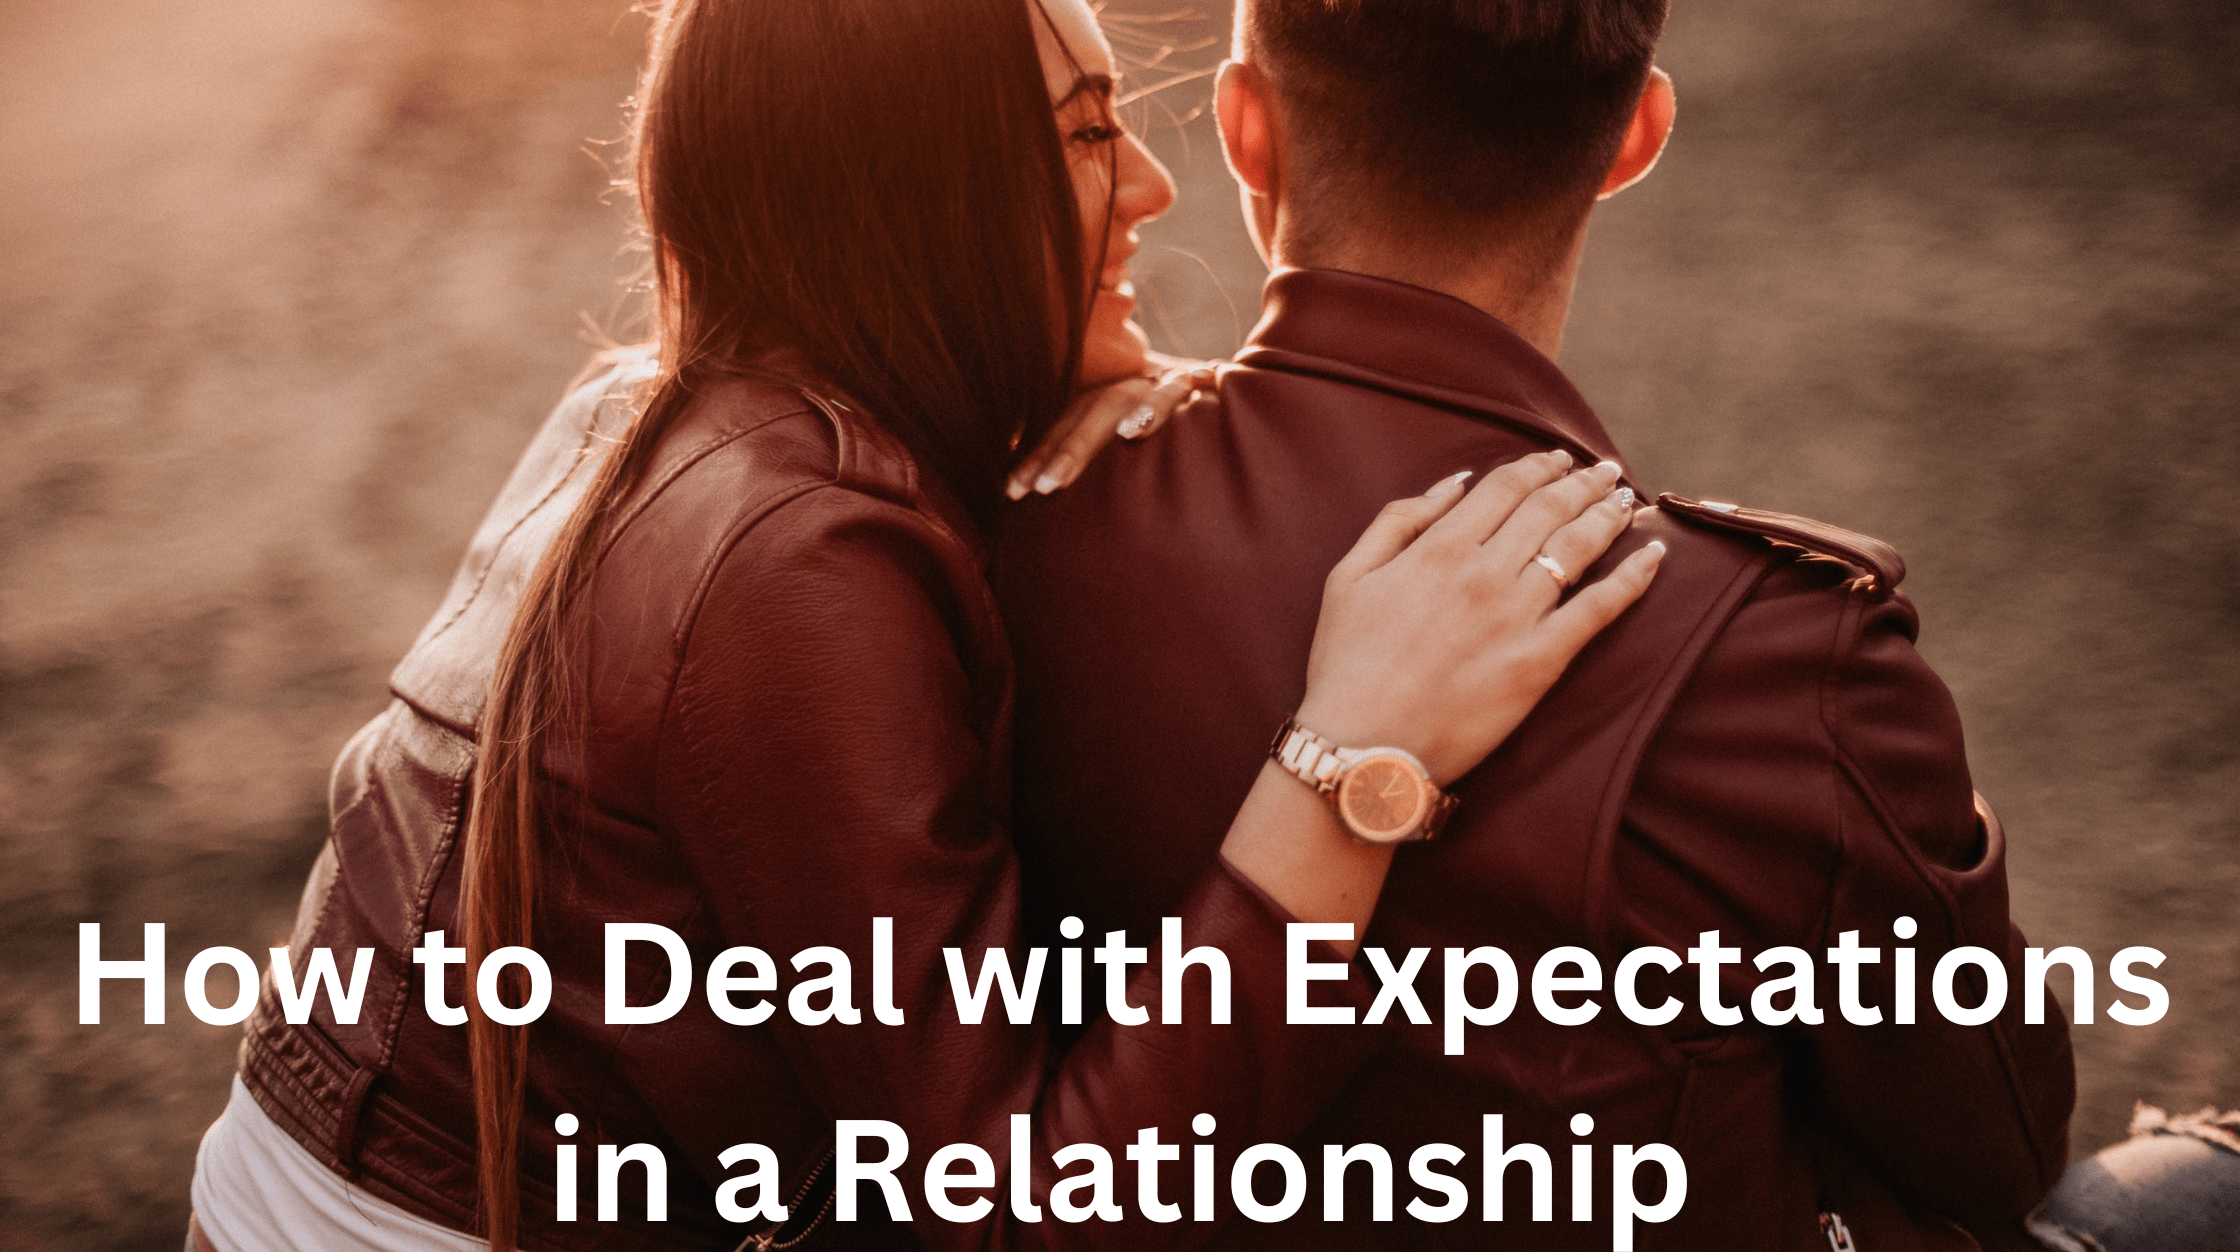 How to Deal with Expectations in a Relationship 5